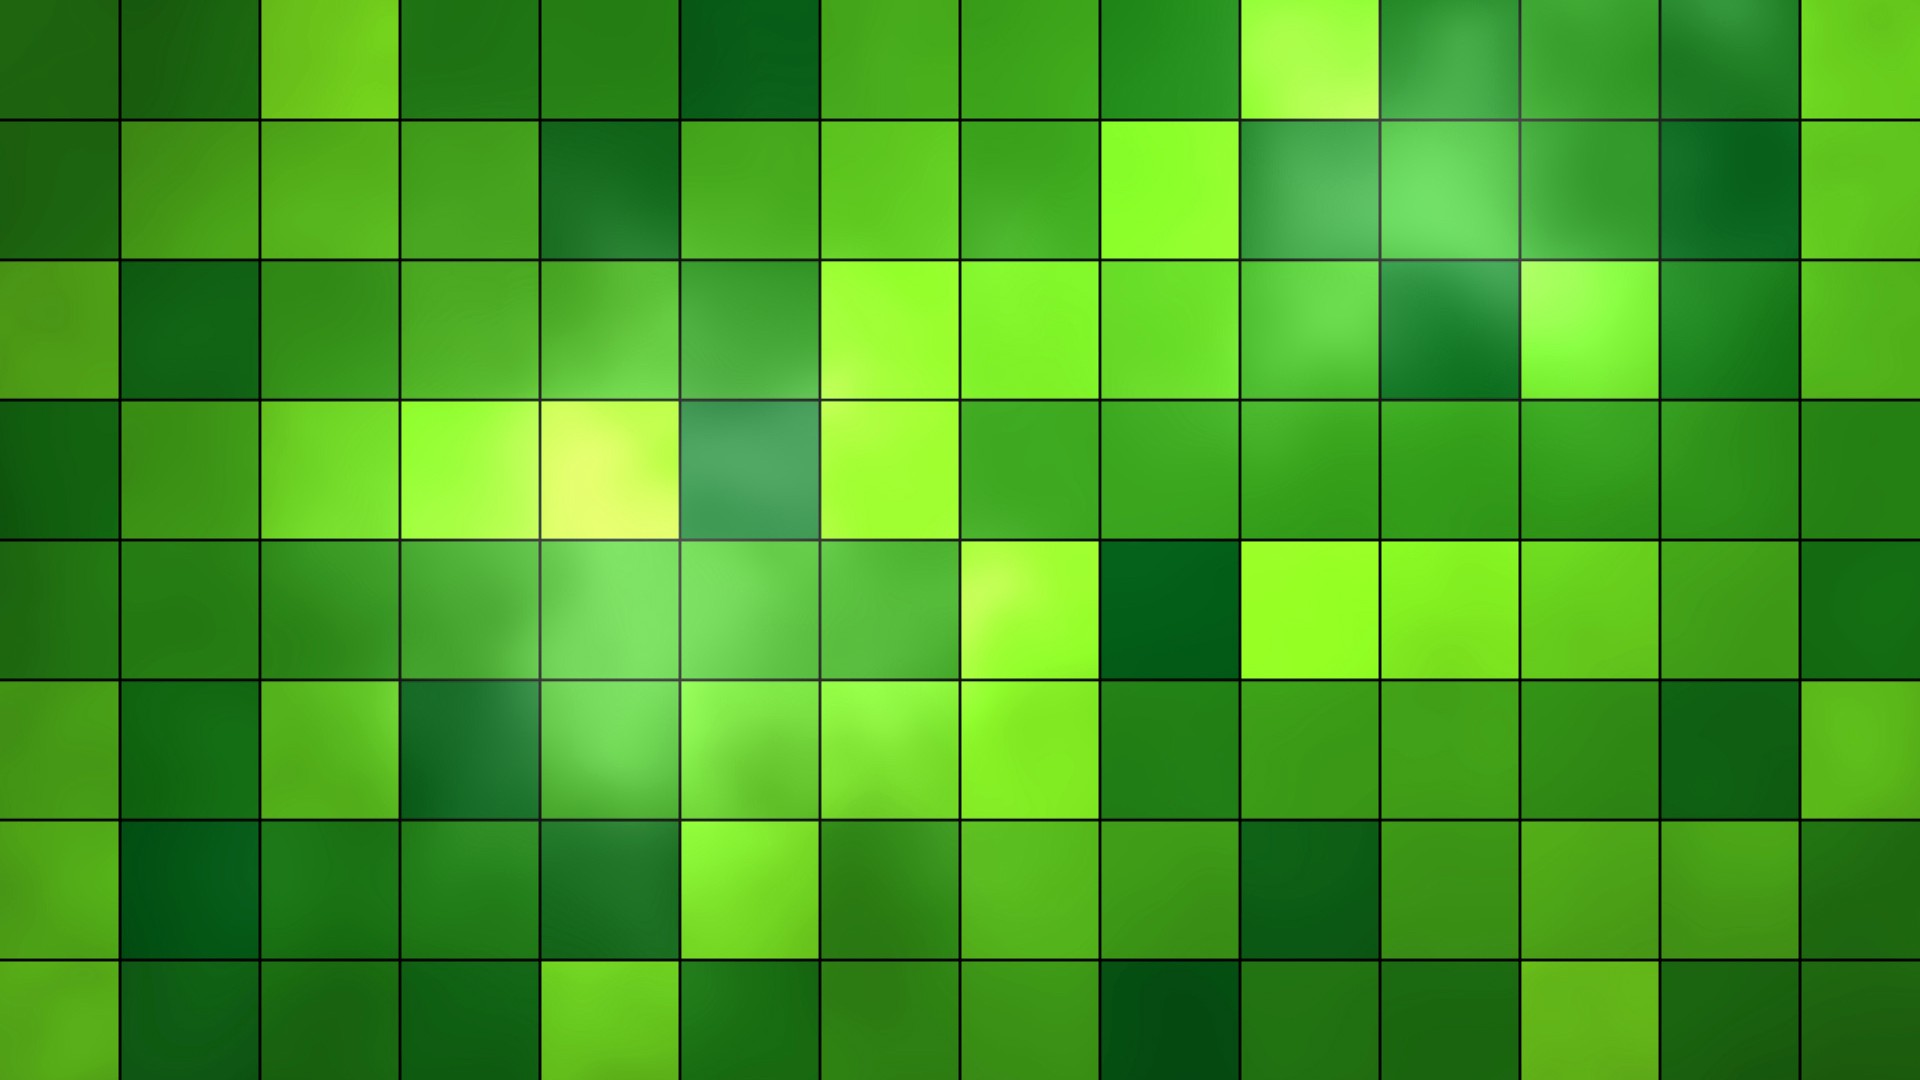 Green Desktop Backgrounds With Resolution 1920X1080 pixel. You can make this wallpaper for your Desktop Computer Backgrounds, Mac Wallpapers, Android Lock screen or iPhone Screensavers